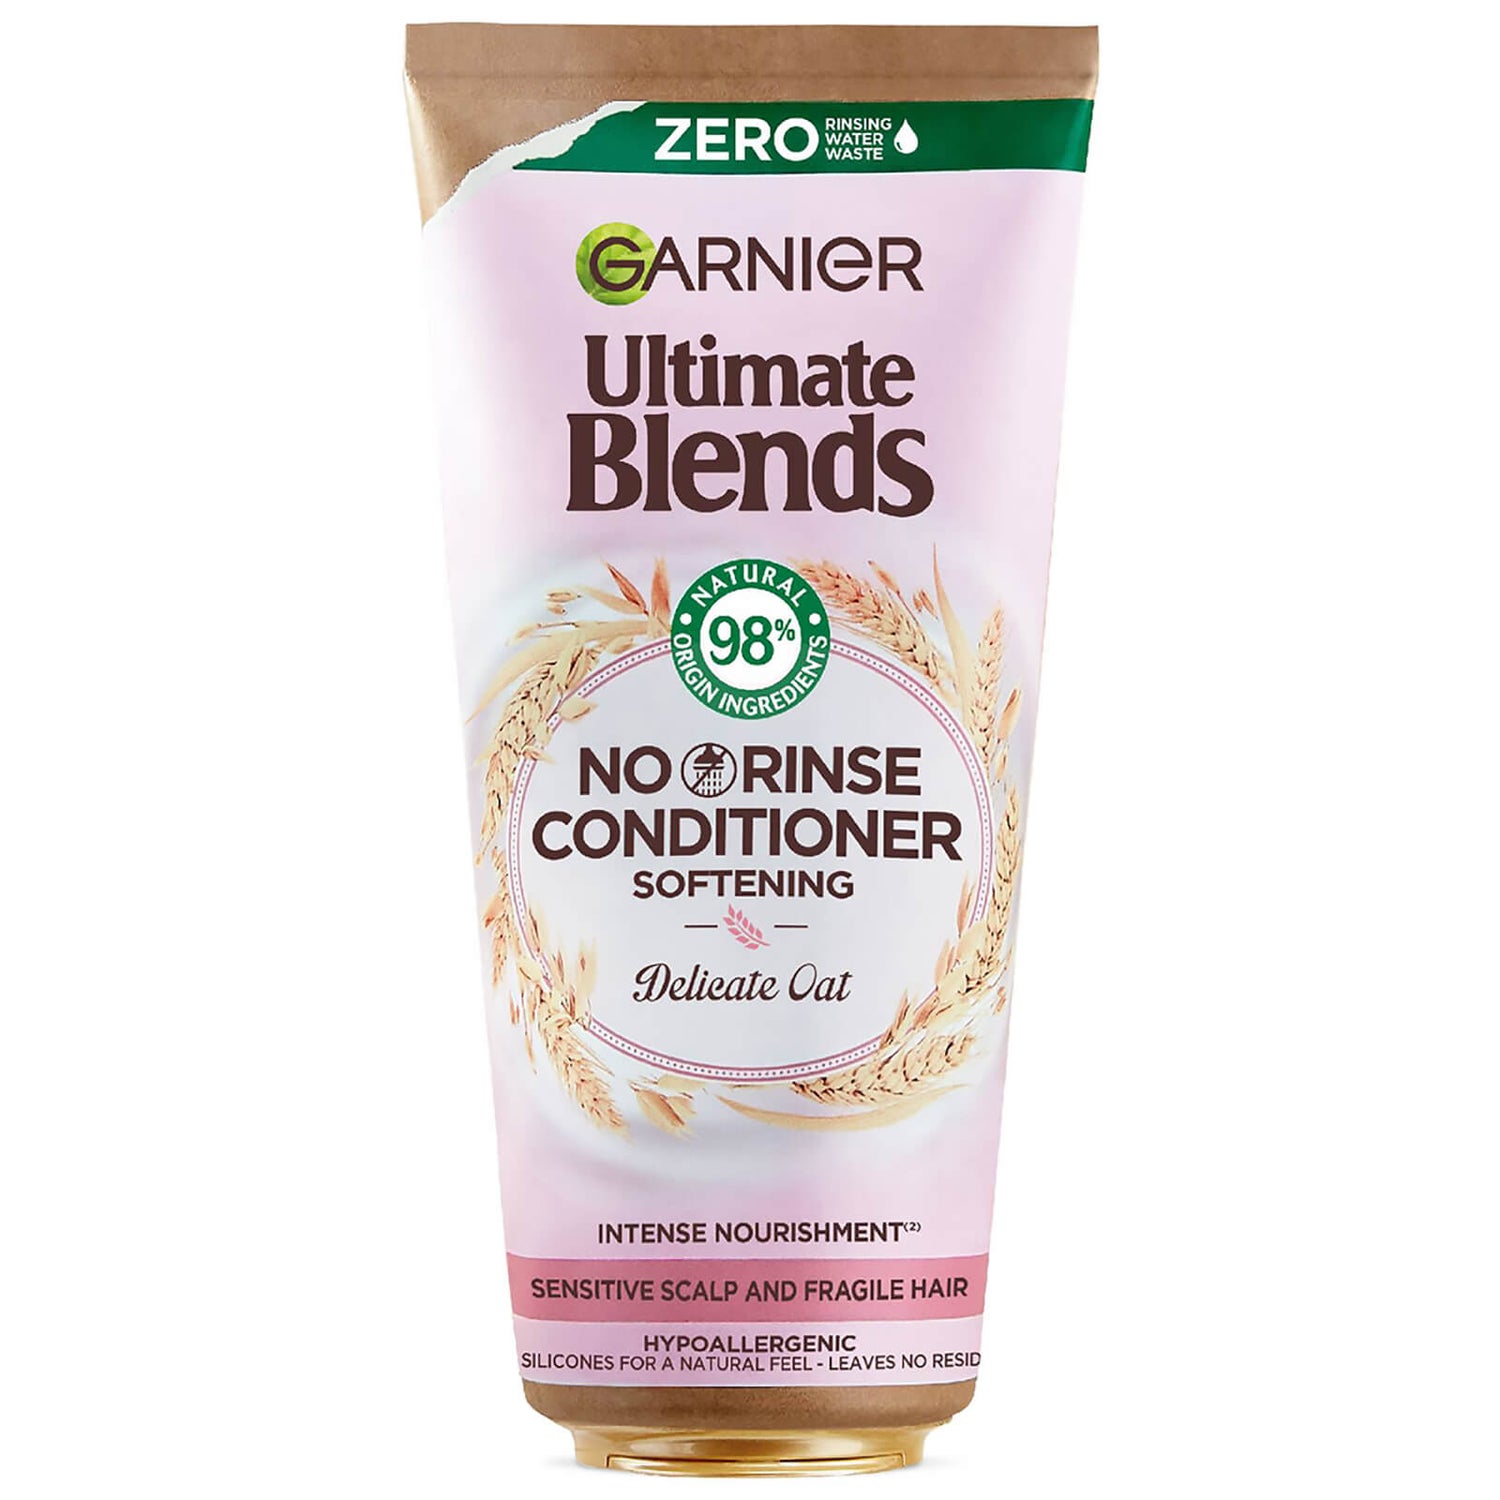 Garnier Ultimate Blends Delicate Oat Soothing NO RINSE Leave-in Conditioner for Sensitive Scalp and Fragile Hair 200ml